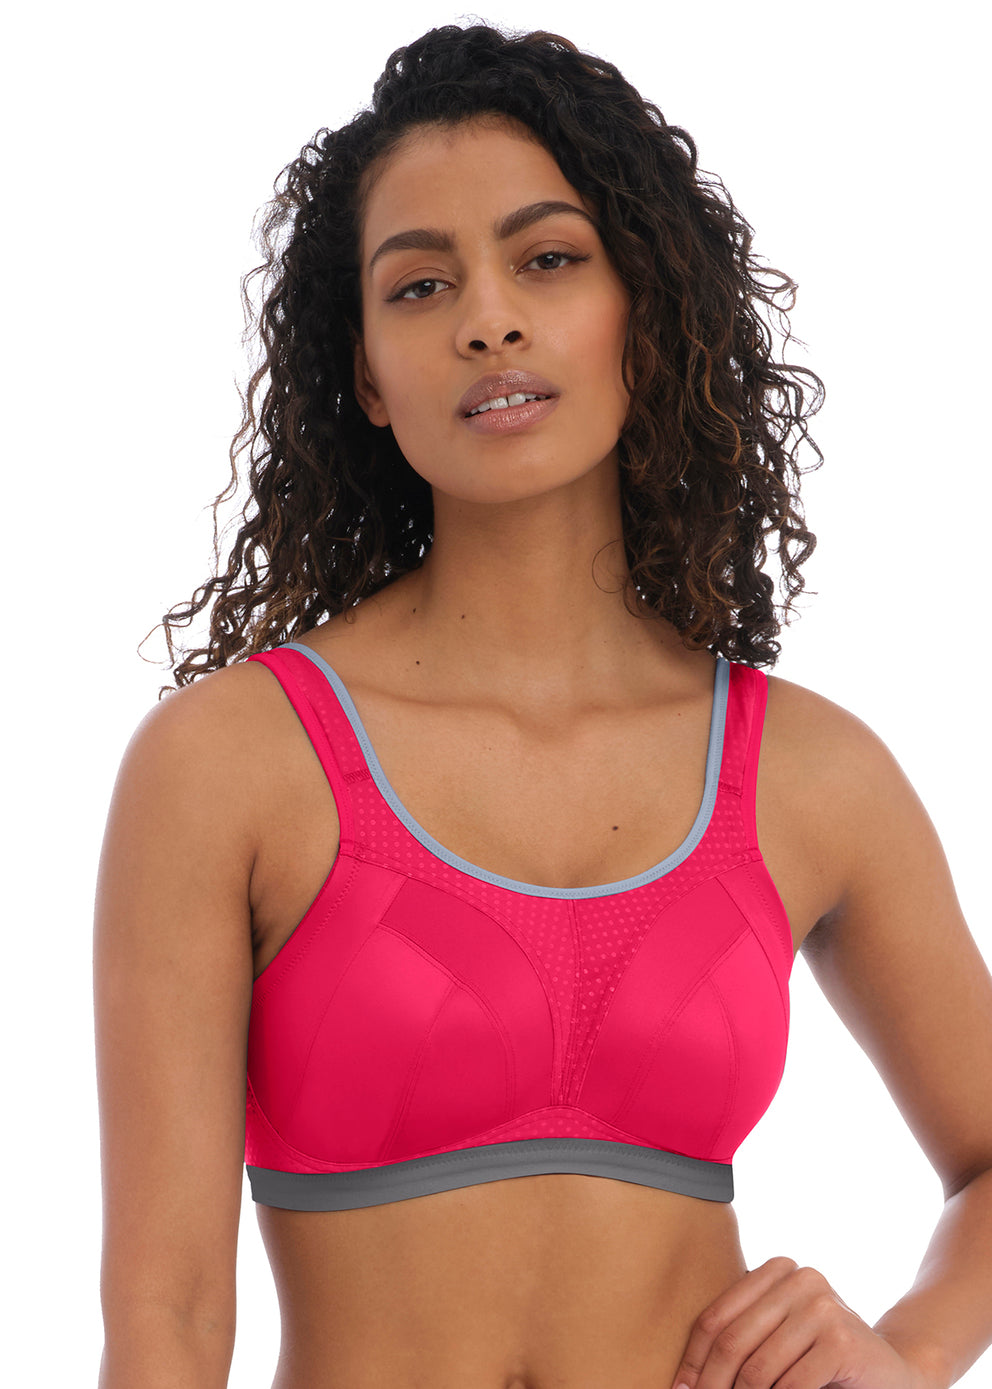 Best tailored support for big boobs: Freya Dynamic Wirefree Sports Bra